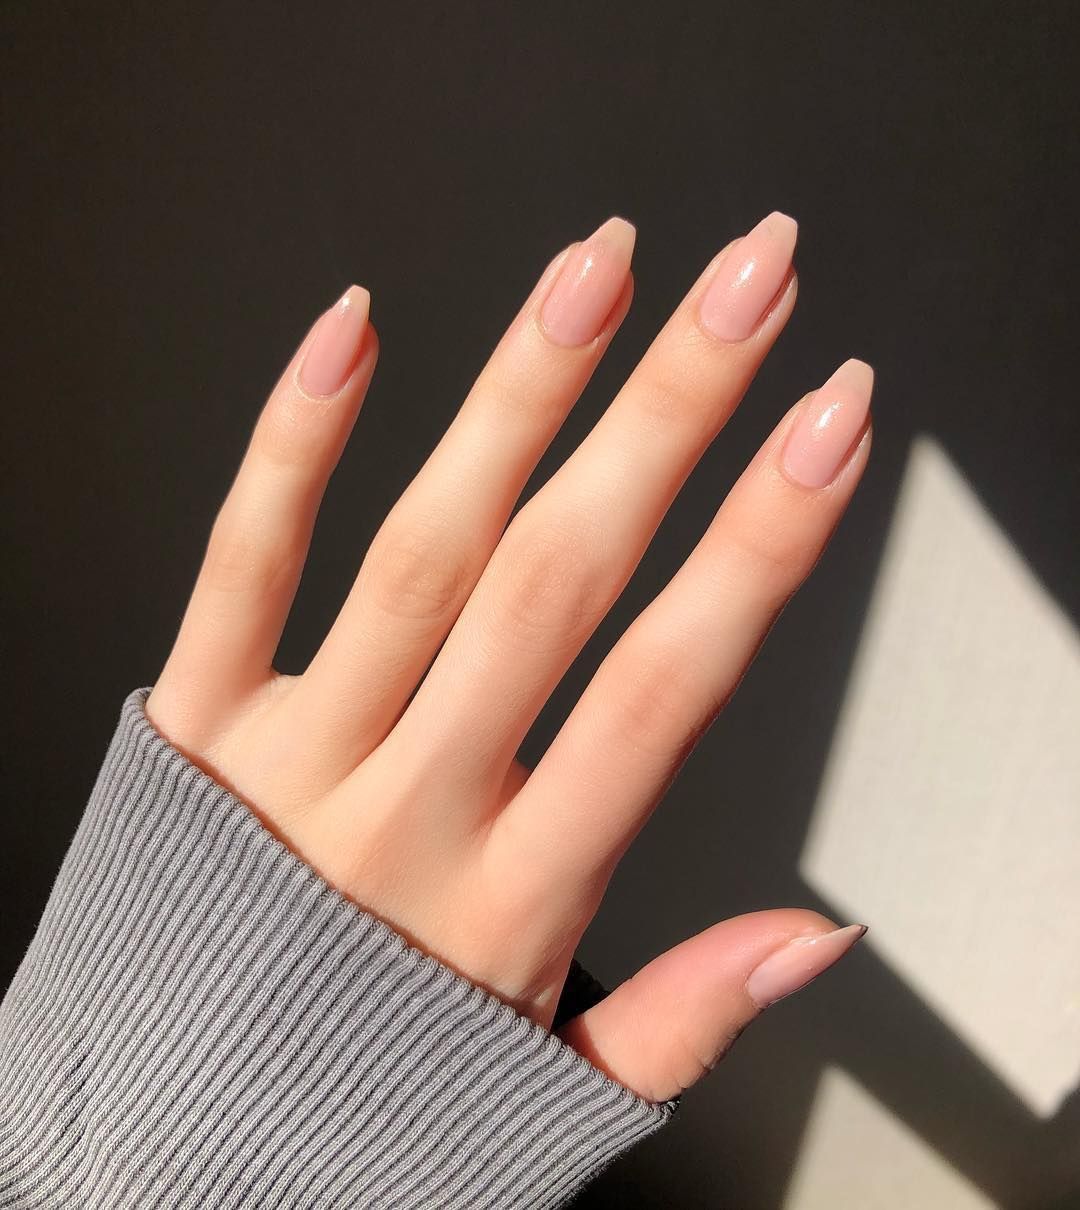 Pin By Teri Sucha On Inspo Pink Nails Cute Nails Dream Nails